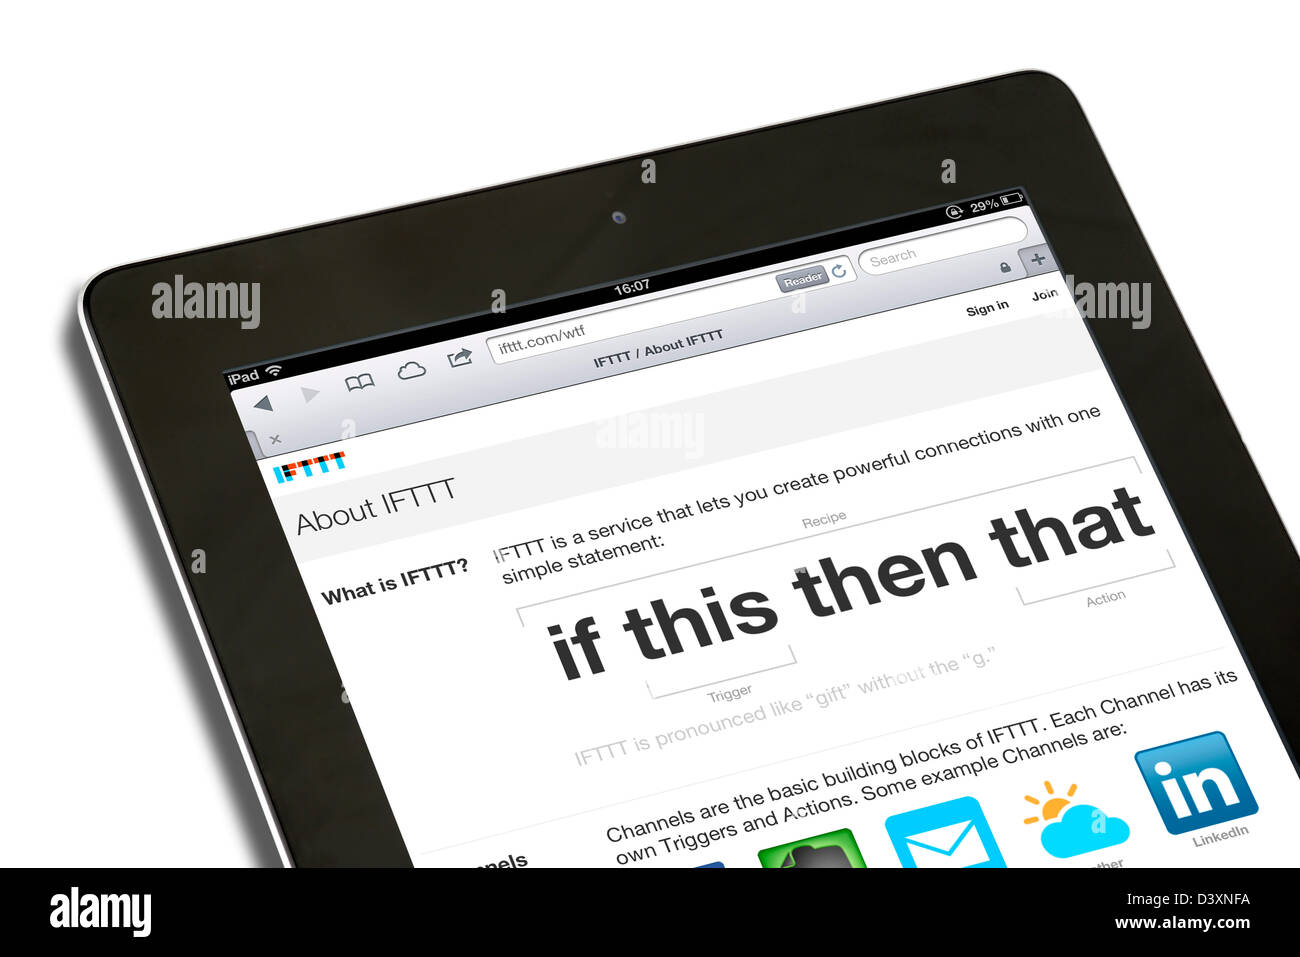 The IFTTT (If This Then That) service on a 4th generation iPad Stock Photo